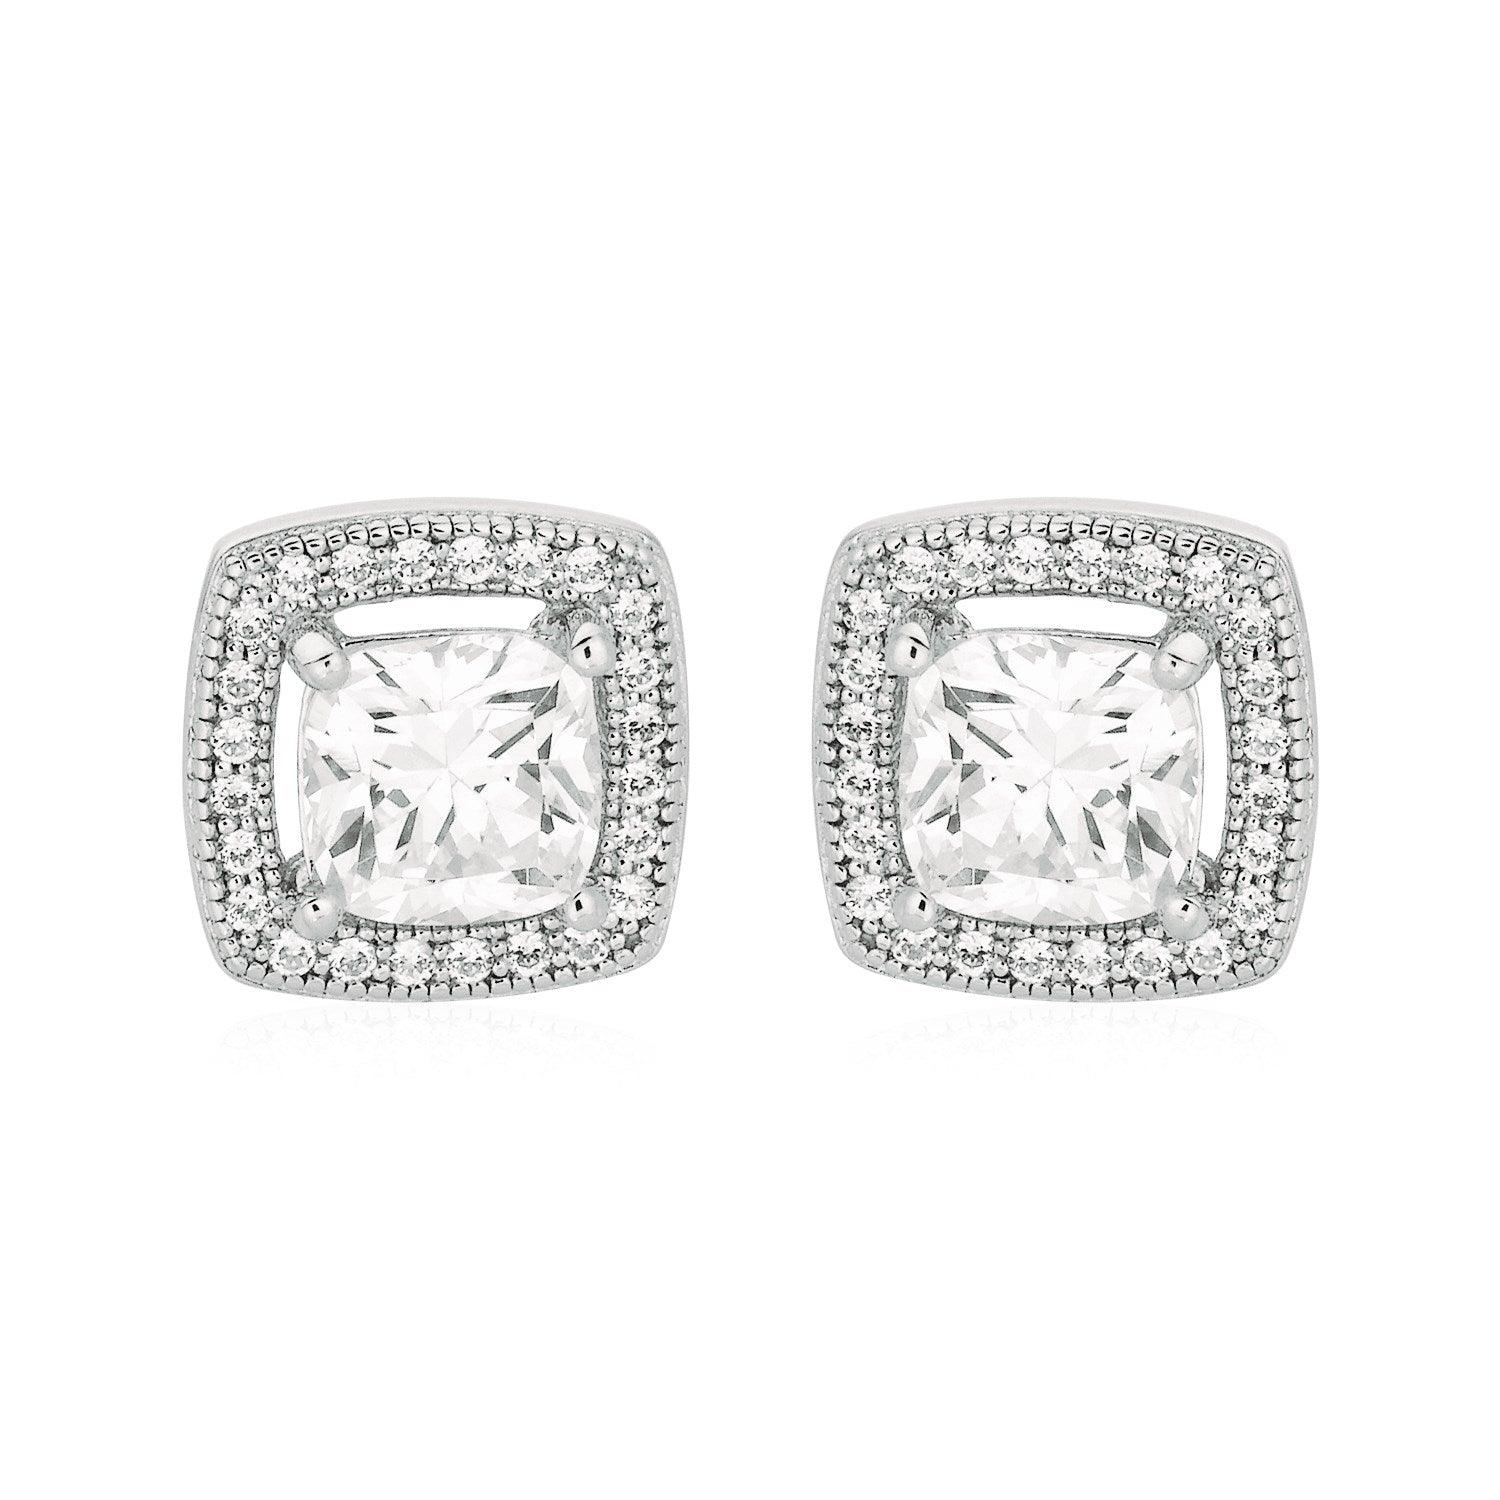 Cushion Earrings with Cubic Zirconia in Sterling Silver freeshipping - Higher Class Elegance